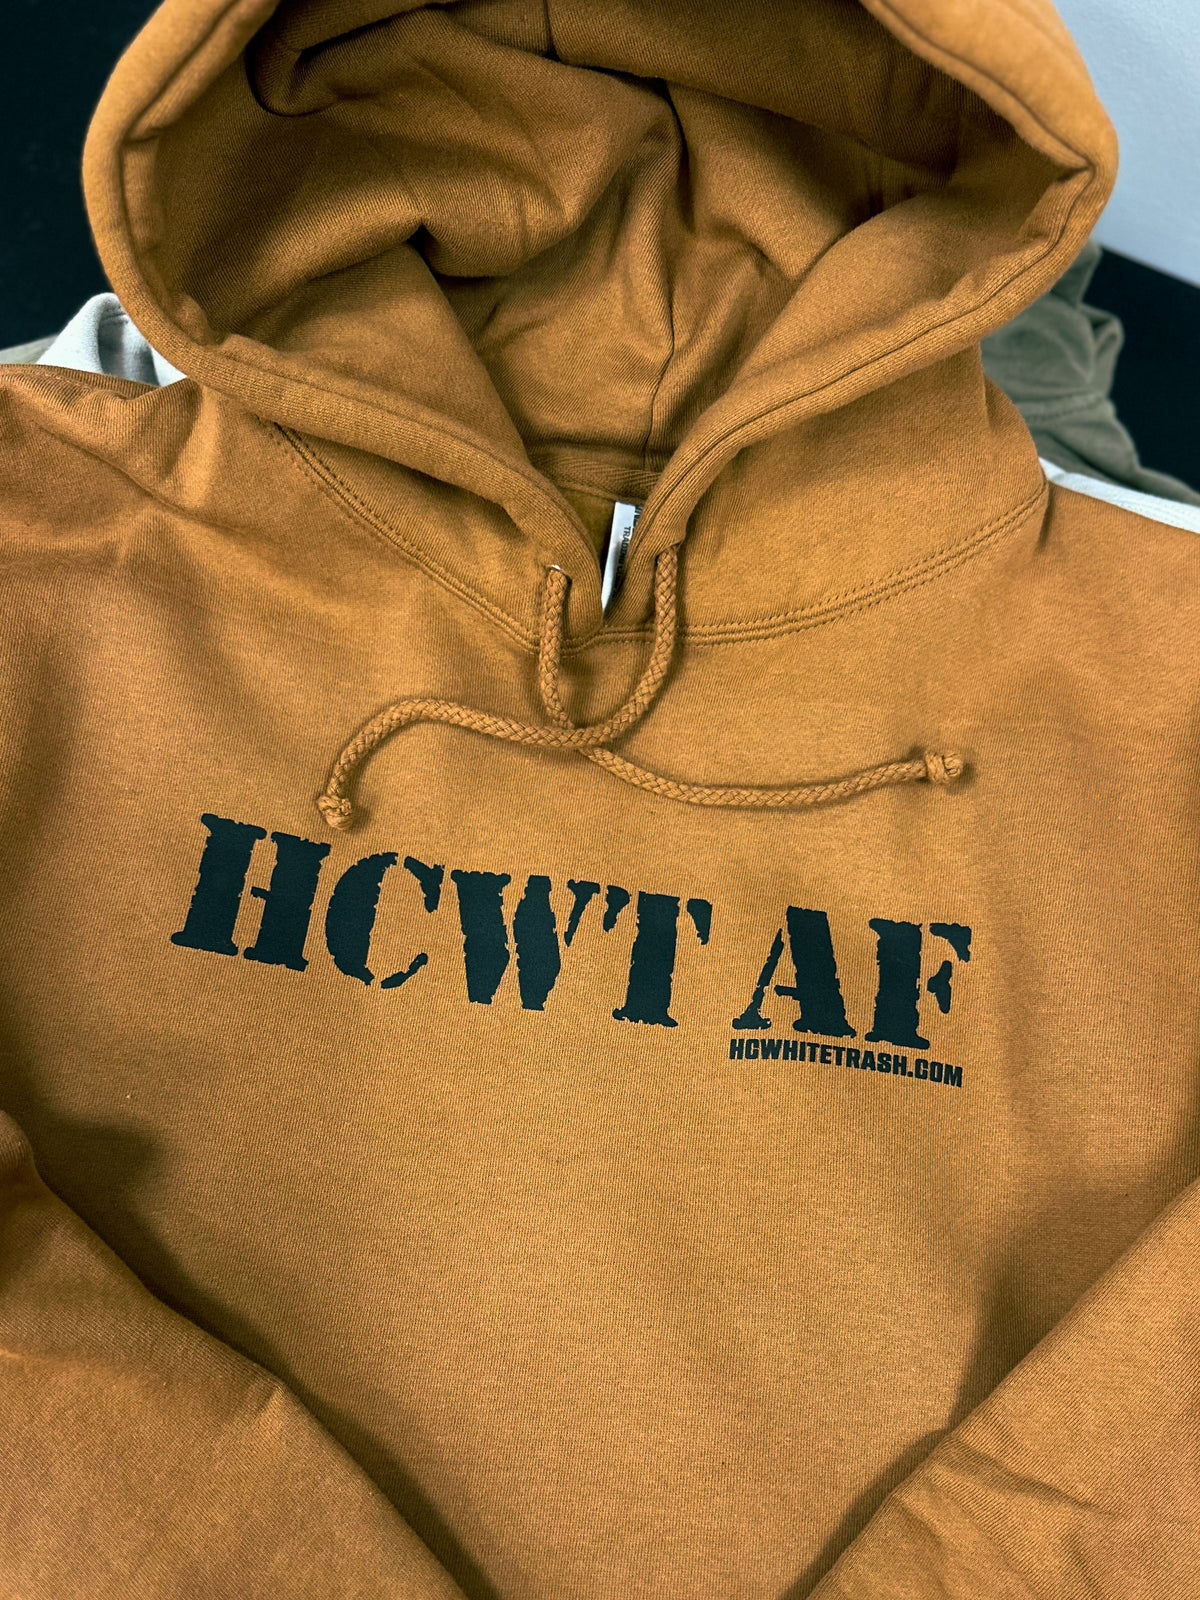 HCWT AF Heavyweight Pullover Hoodie - Saddle